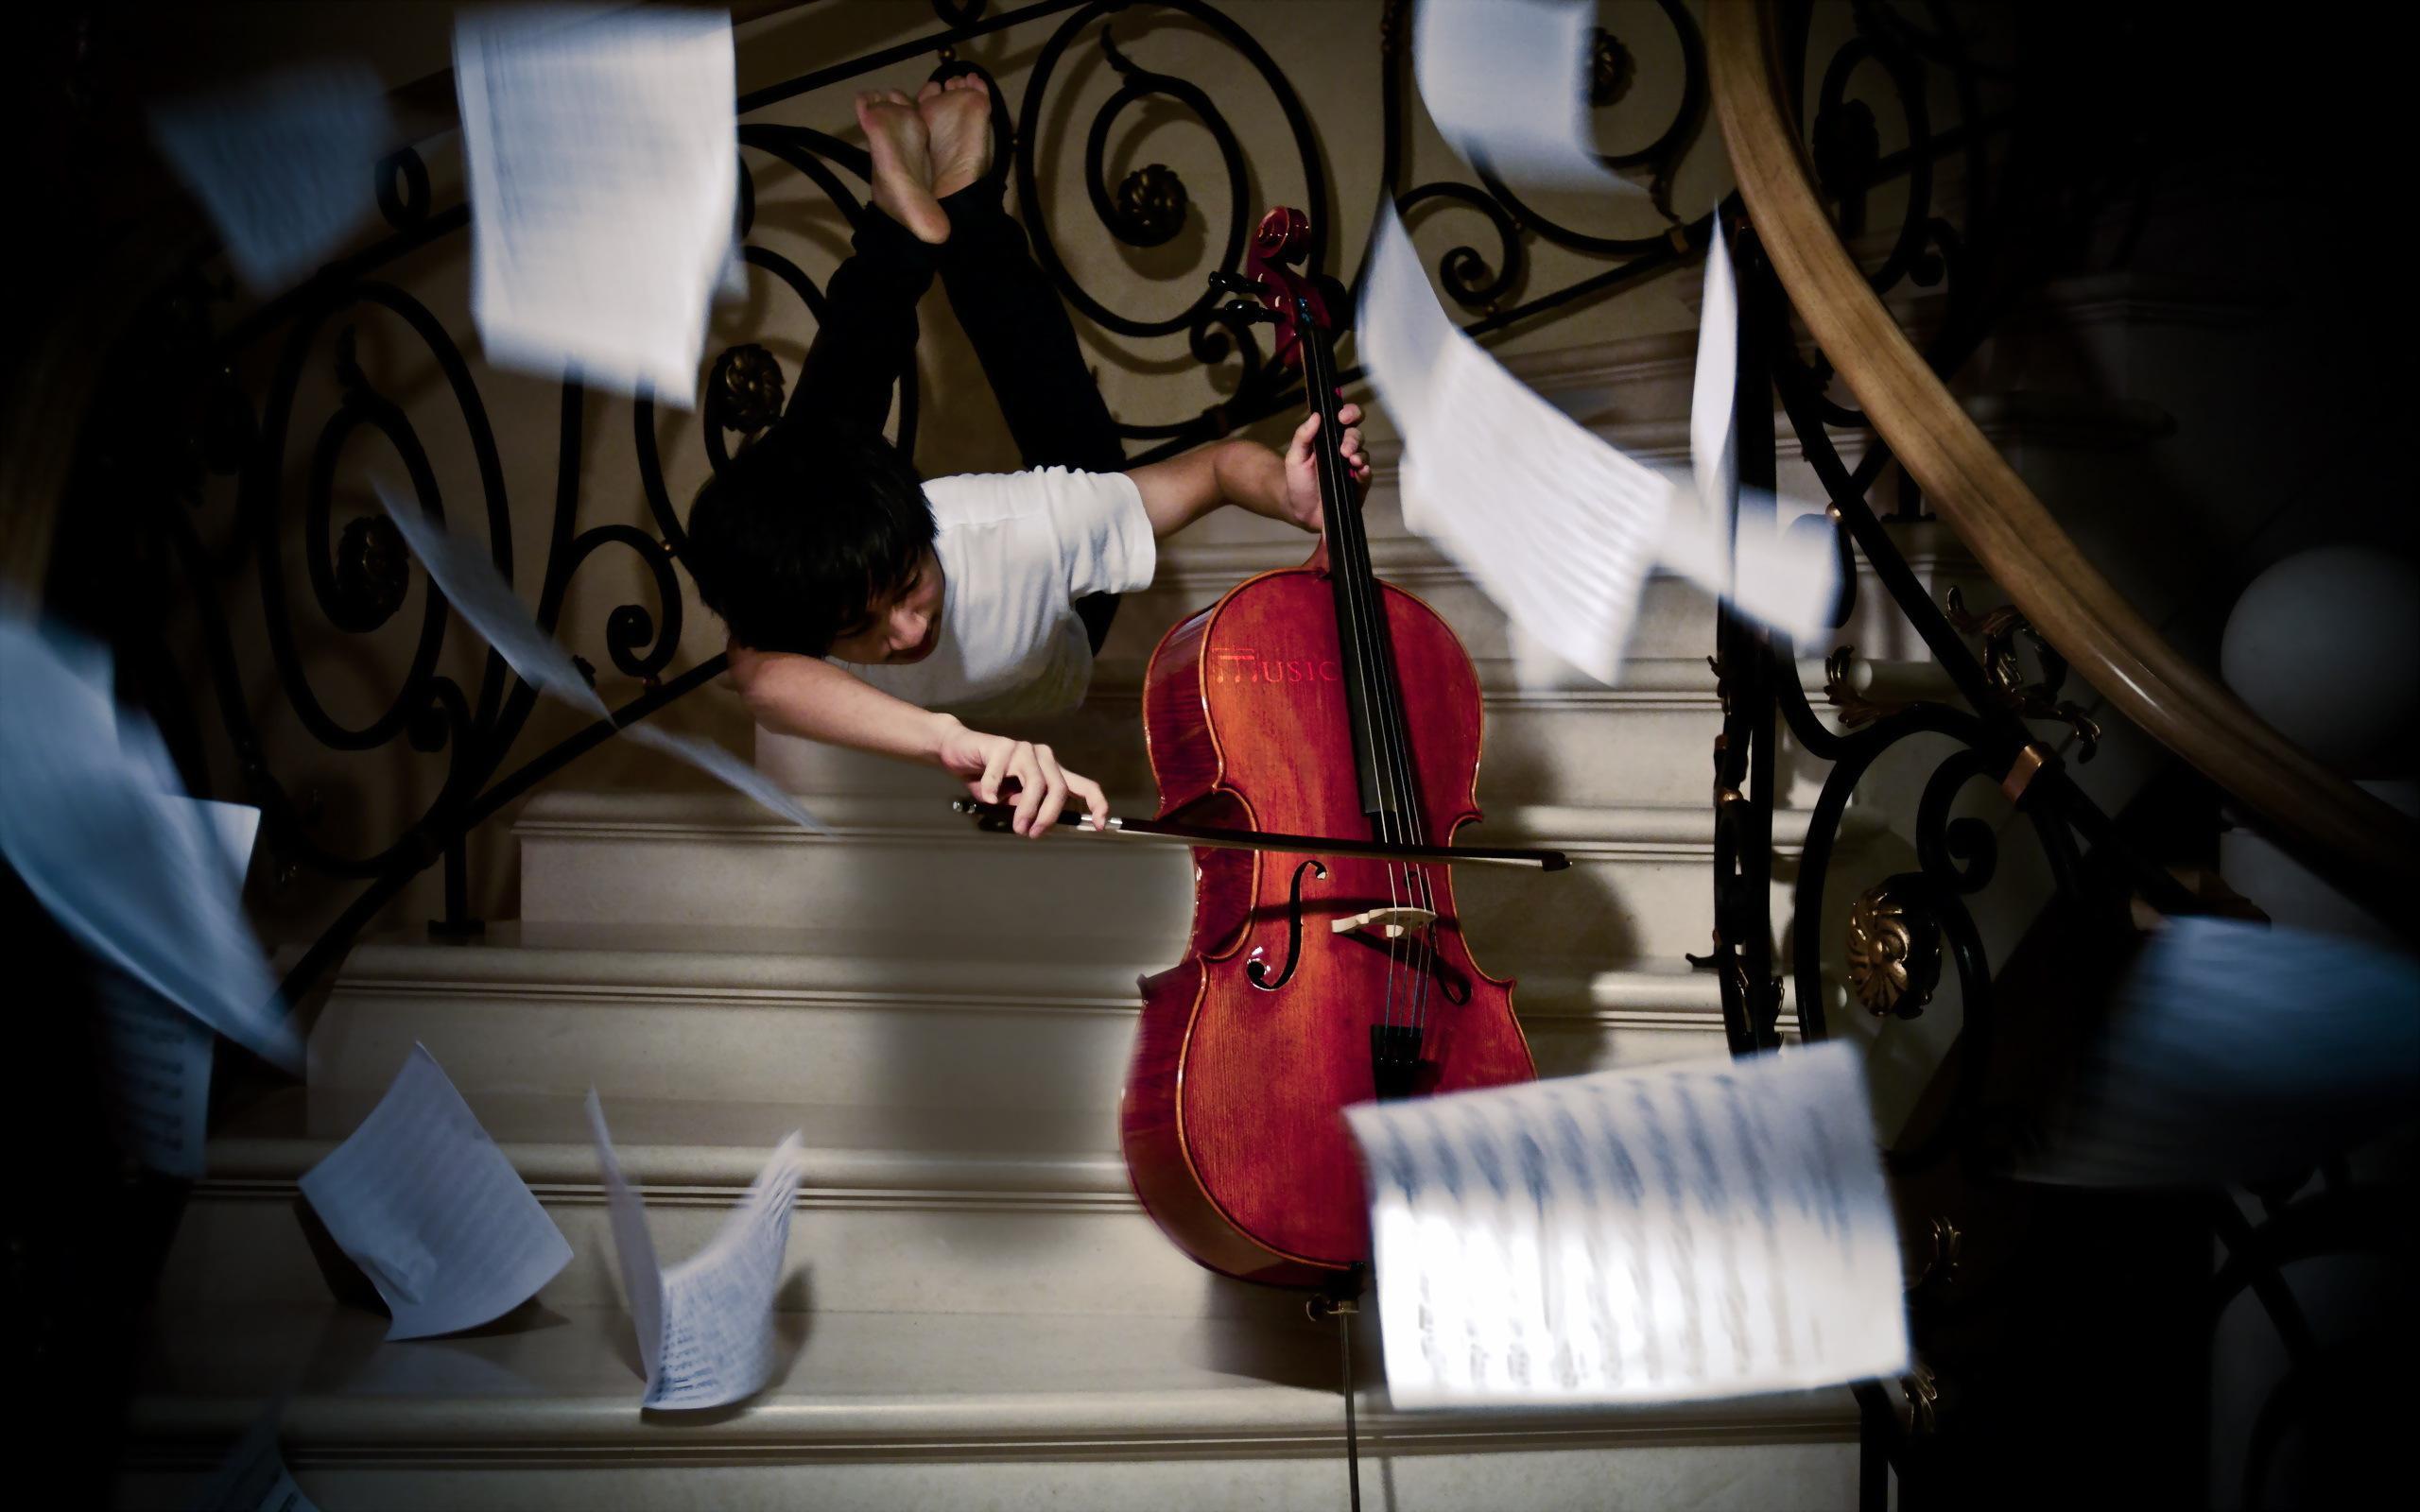 Playing the cello wallpaper